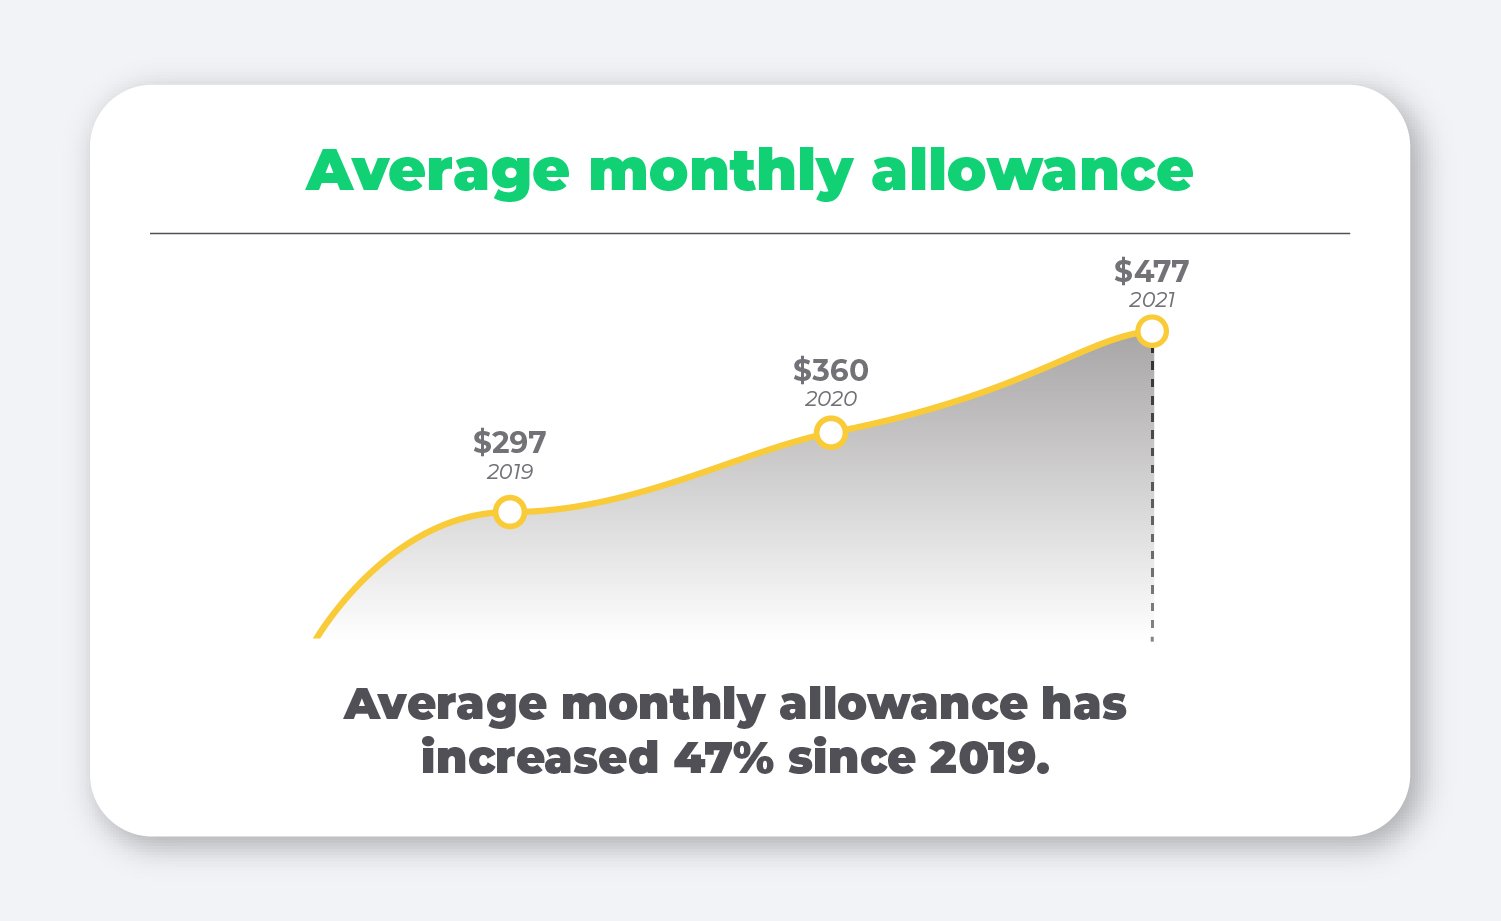 2022 average monthly allowance, QSEHRA. Average monthly allowance has increased 47% since 2019.